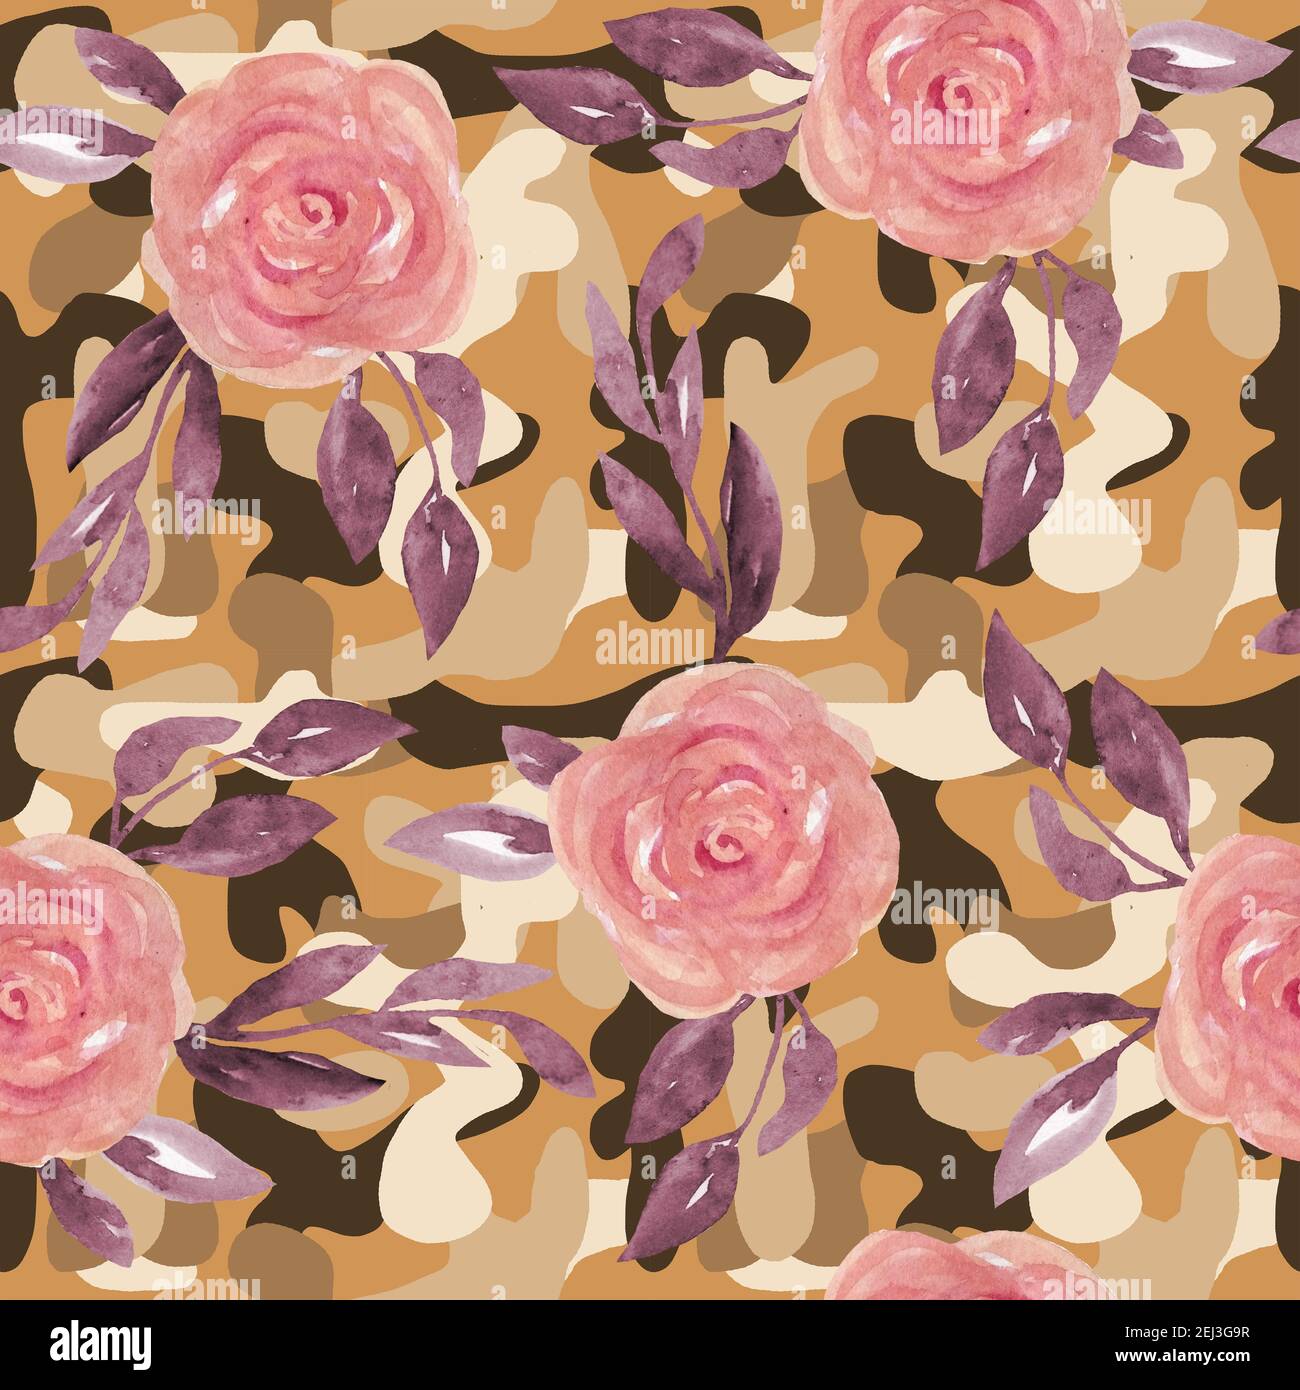 Floral camo camouflage seamless pattern with pink roses flowers. Military army design, textile for masking hiding hunting. Print for war soldiers in jungle desert forest outdoors, trendy style texture Stock Photo